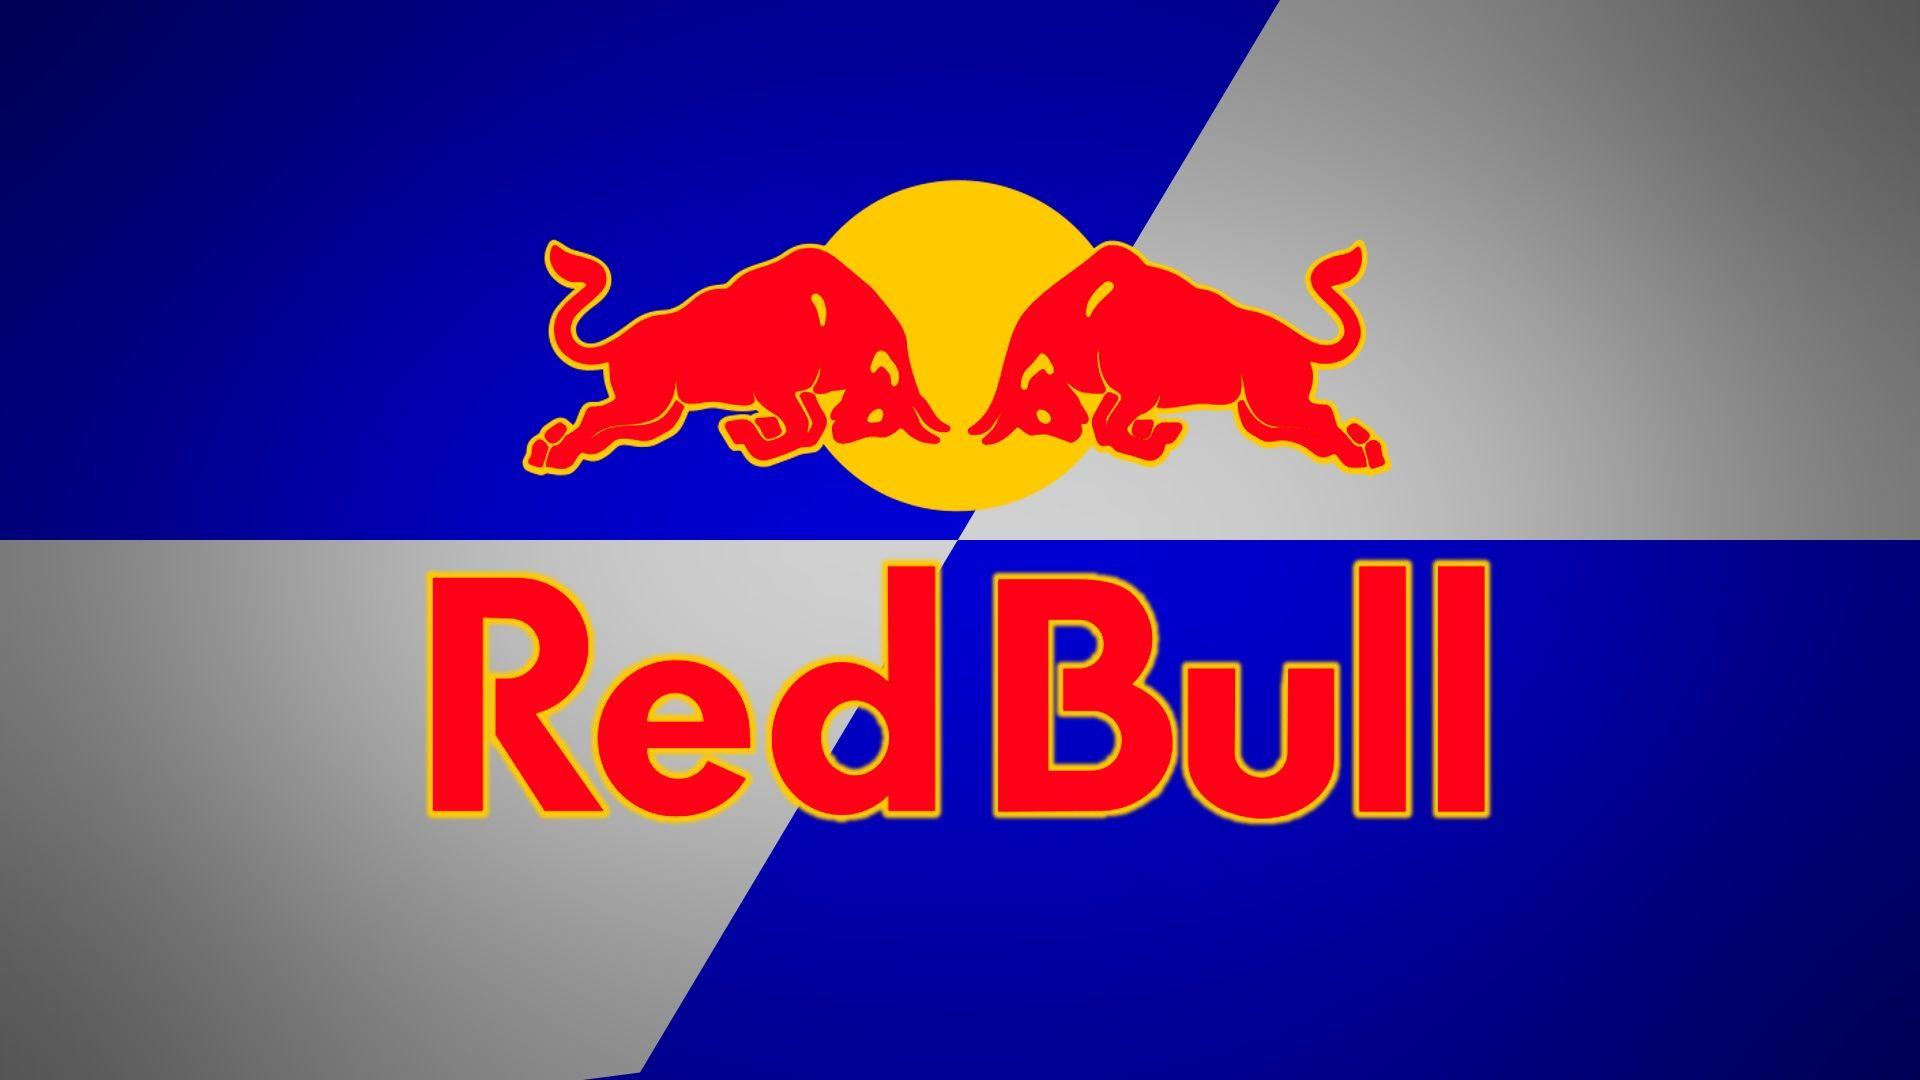 Red Bull Energy Drink Logo - The Dangers Of Energy Drinks | SiOWfa16: Science in Our World ...